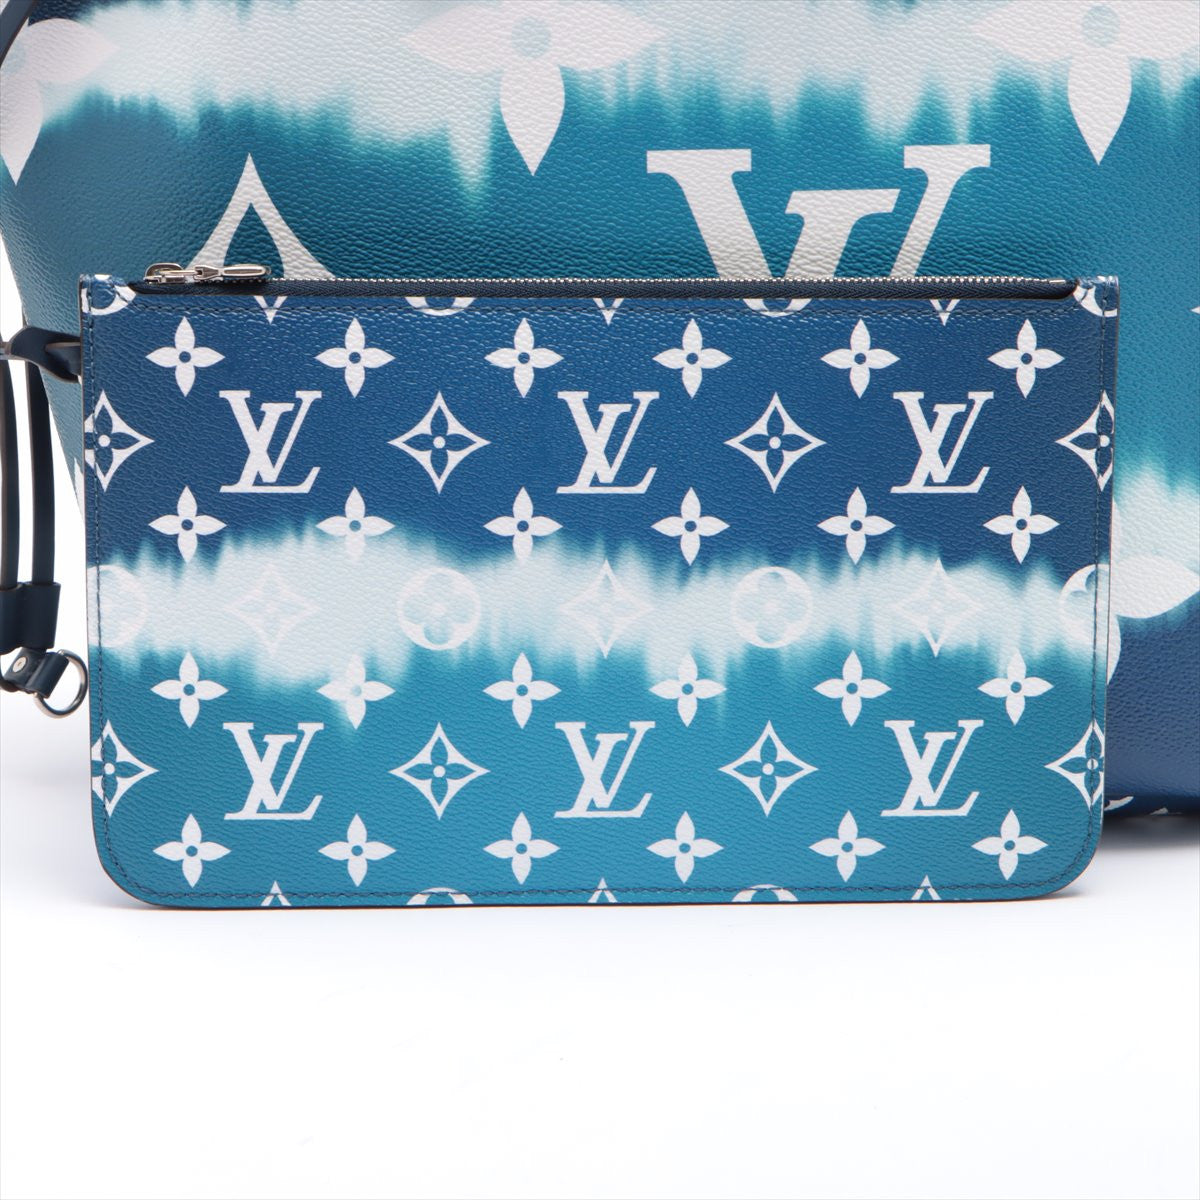 LV Escale 2020 Collection NeverFull ombre bag  Ombre bag, Louis vuitton, Louis  vuitton bag neverfull